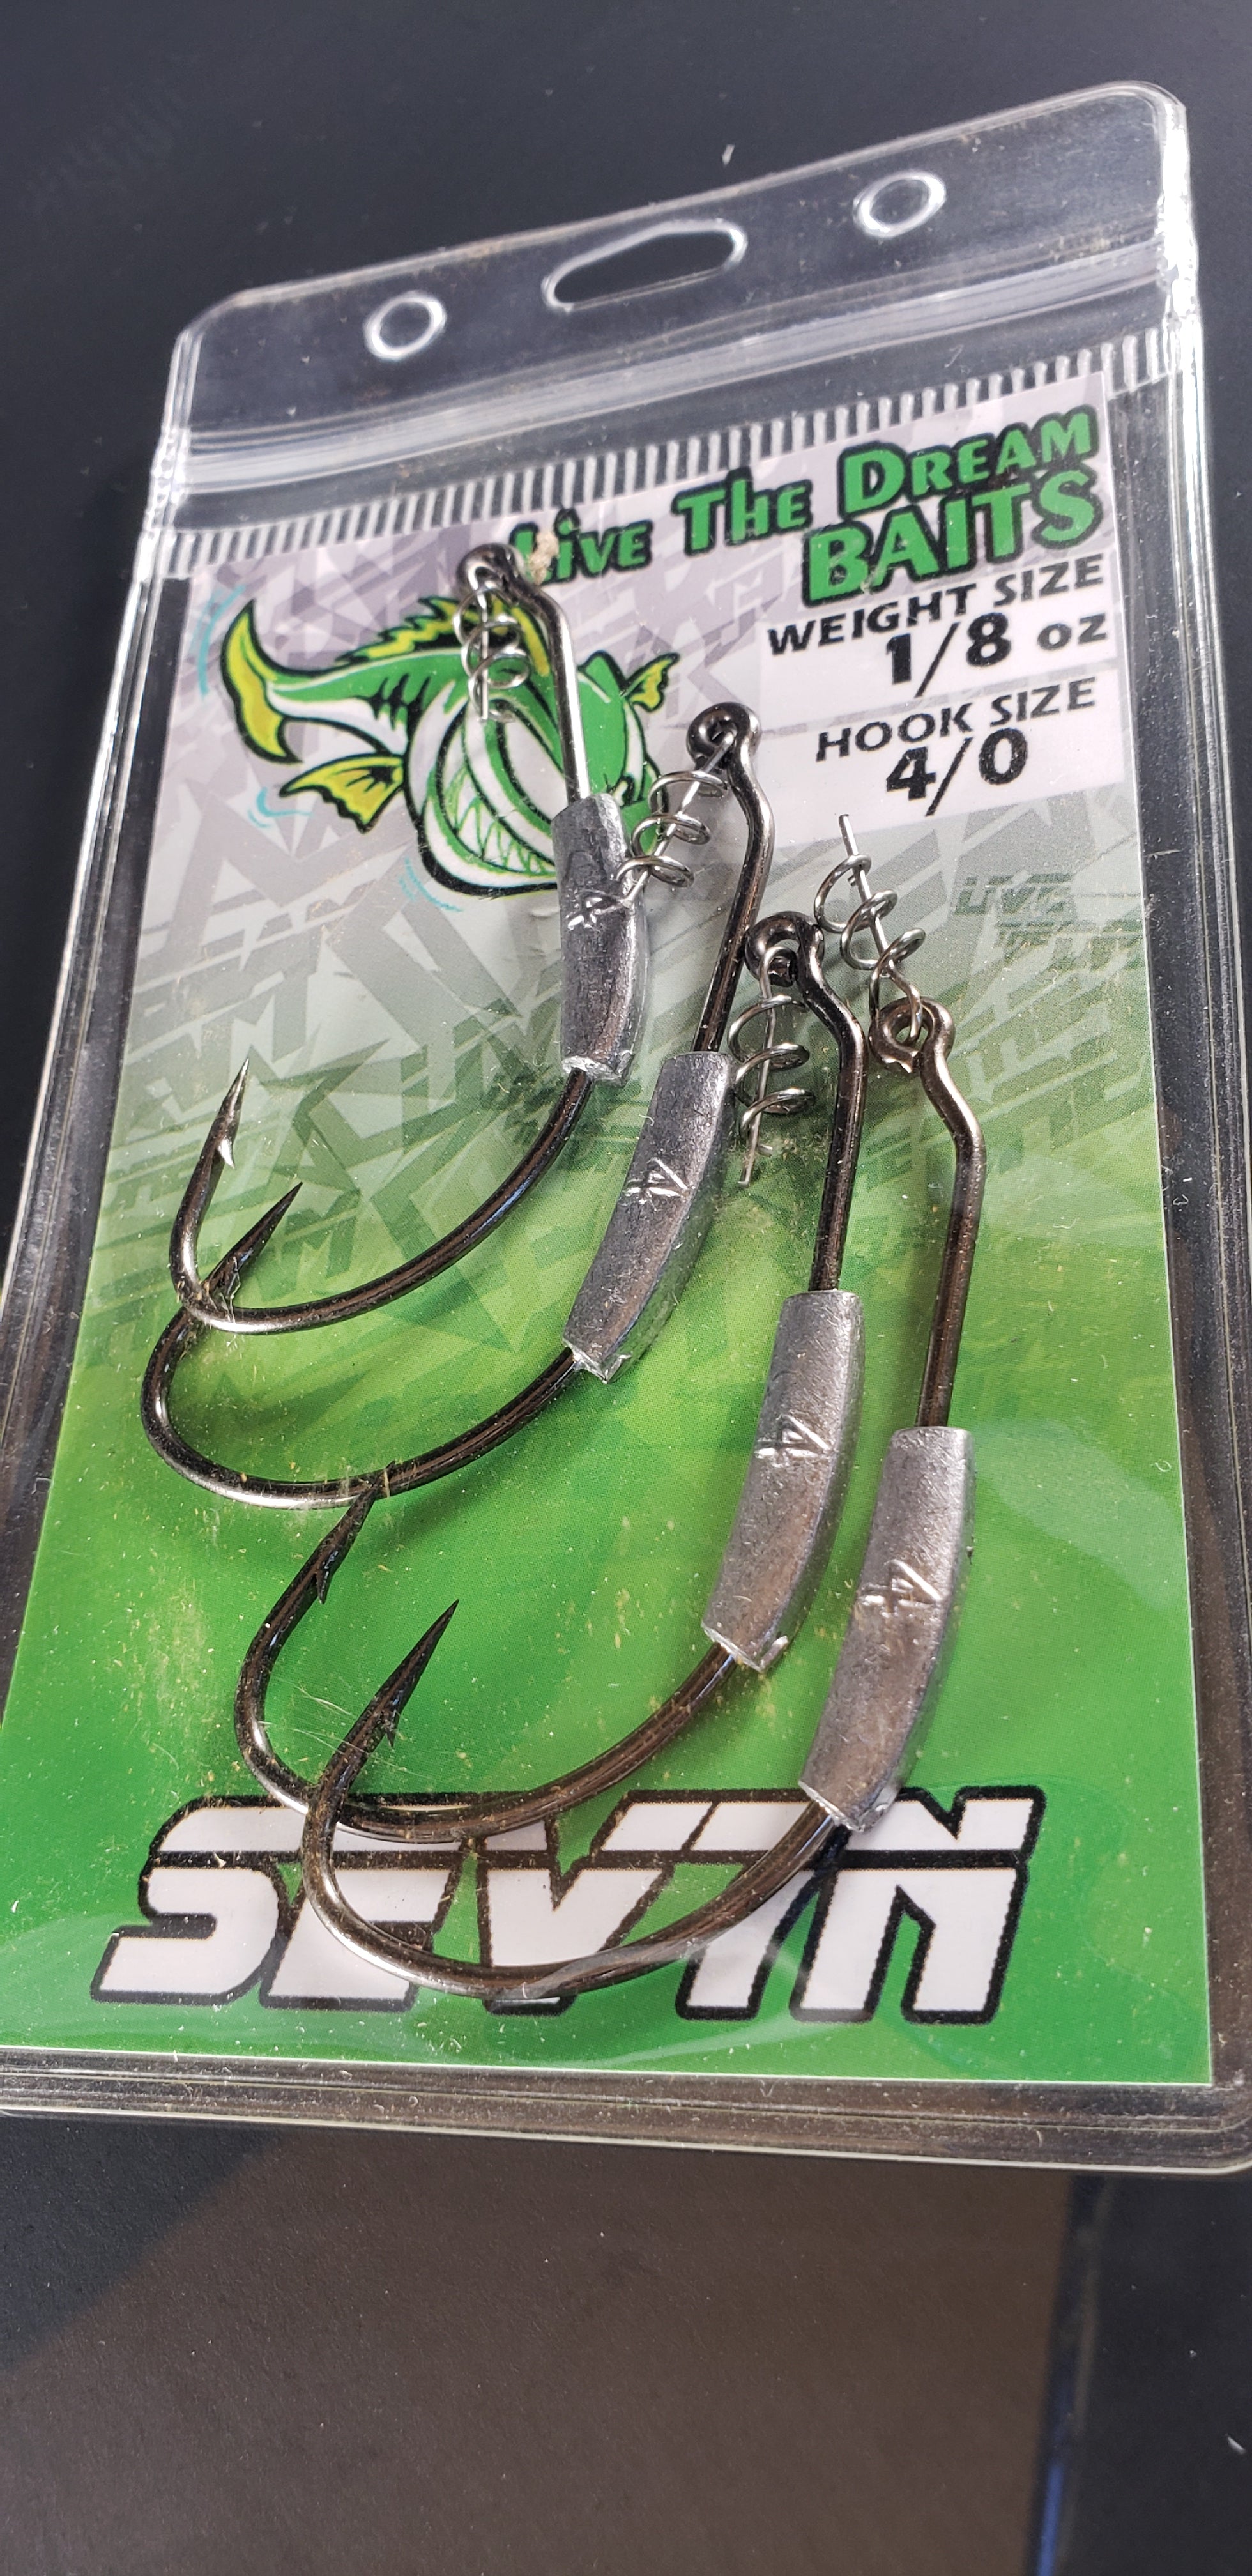 Columbia River Tackle Deluxe Snagging Hooks –